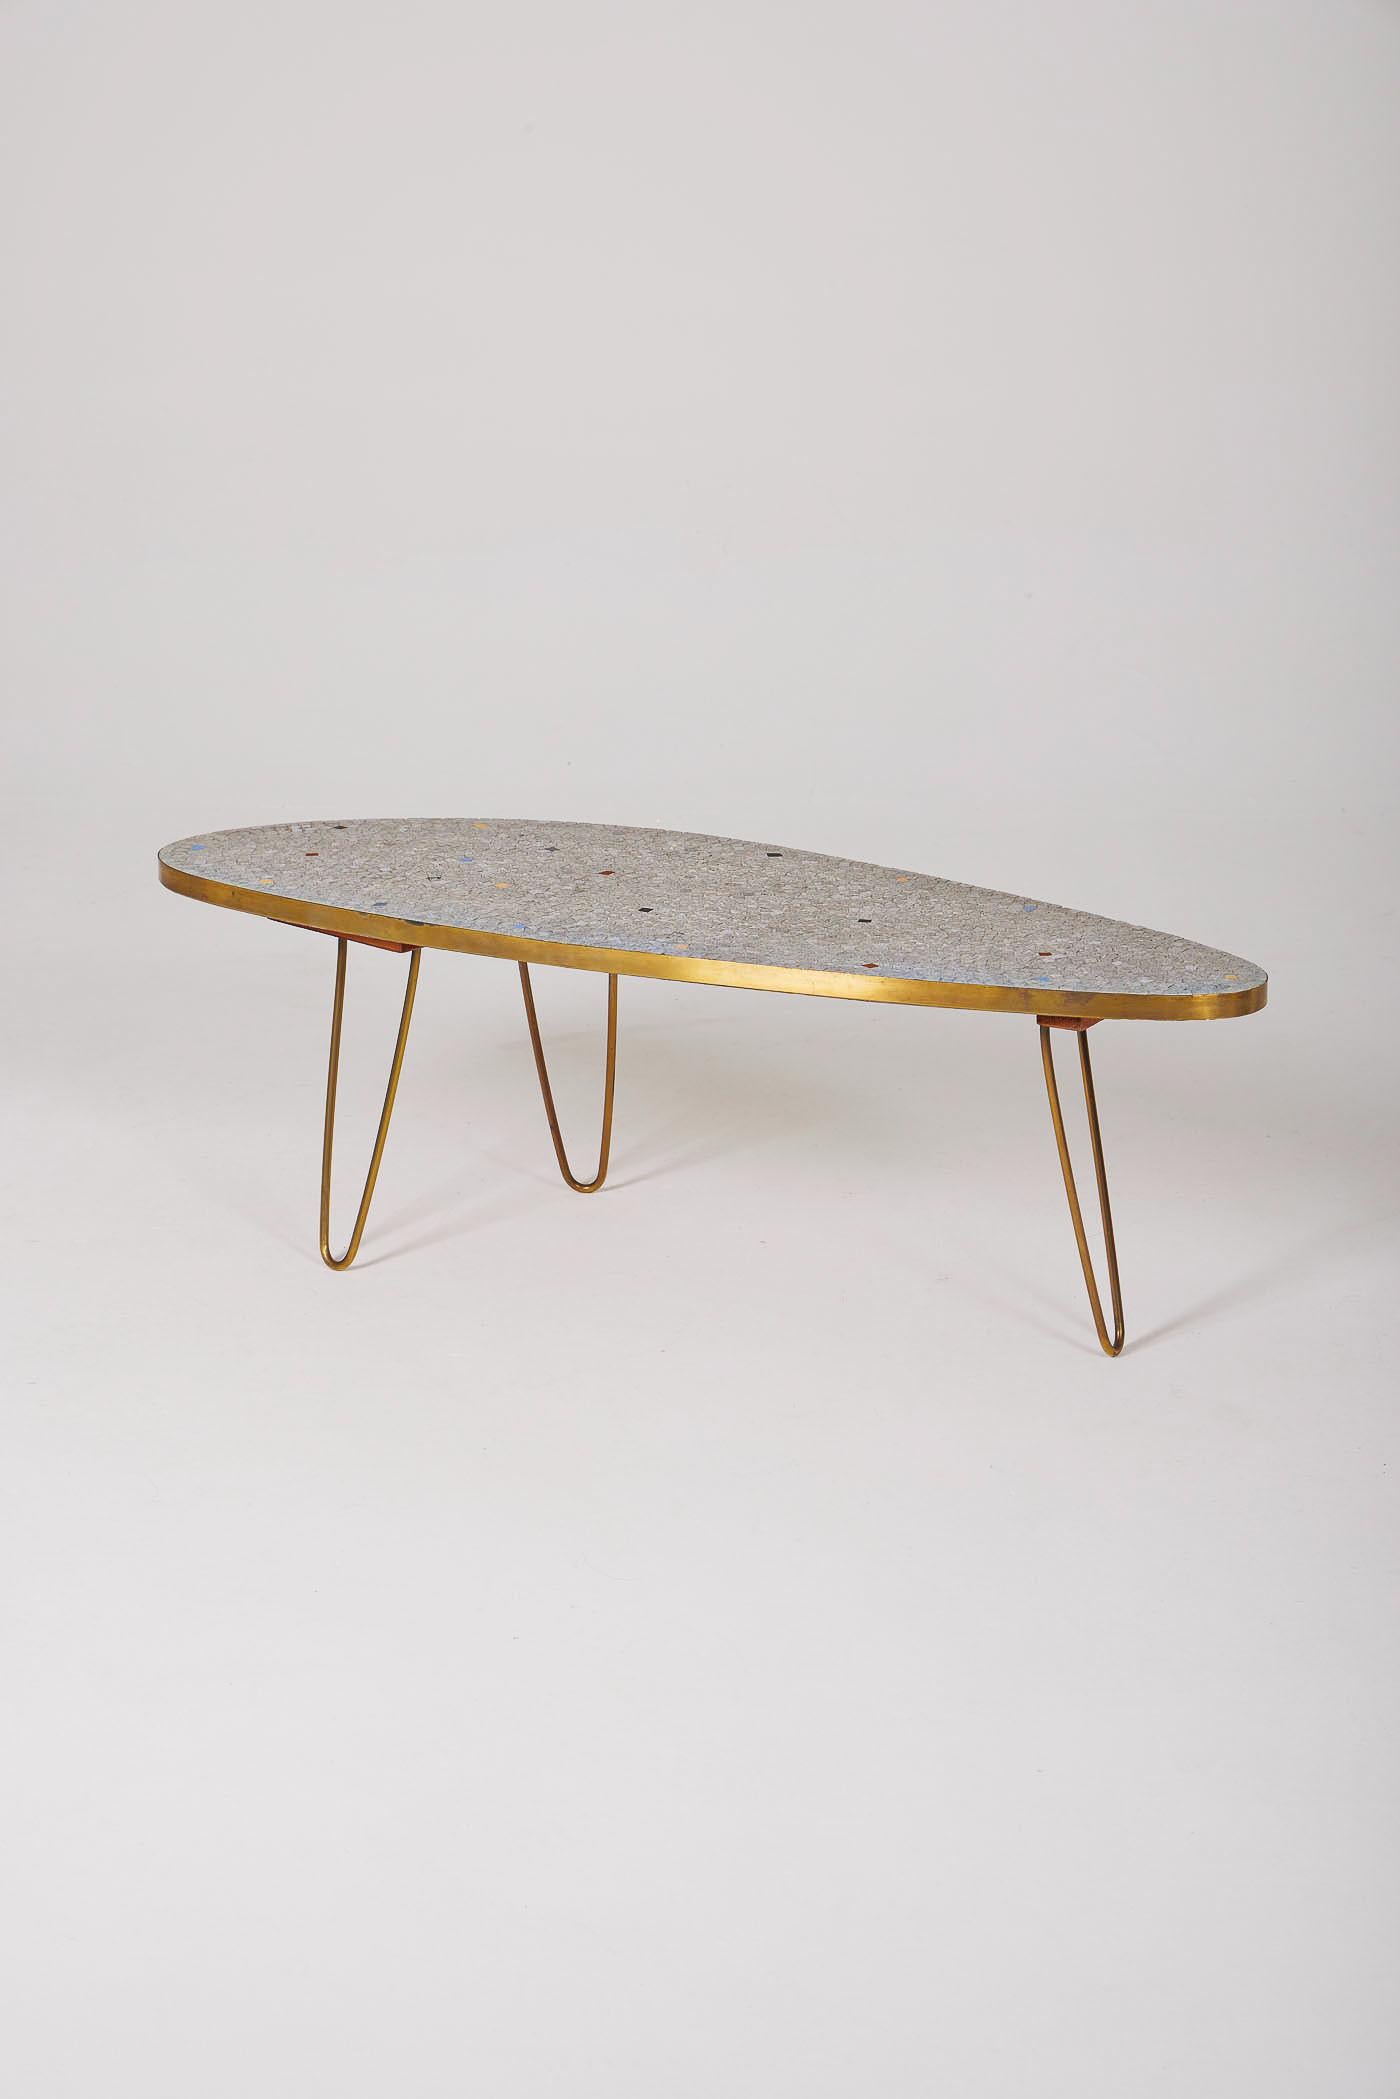 Vintage 1970s mosaic coffee table. The structure features a tripod base in golden brass. In very good condition.
DV444